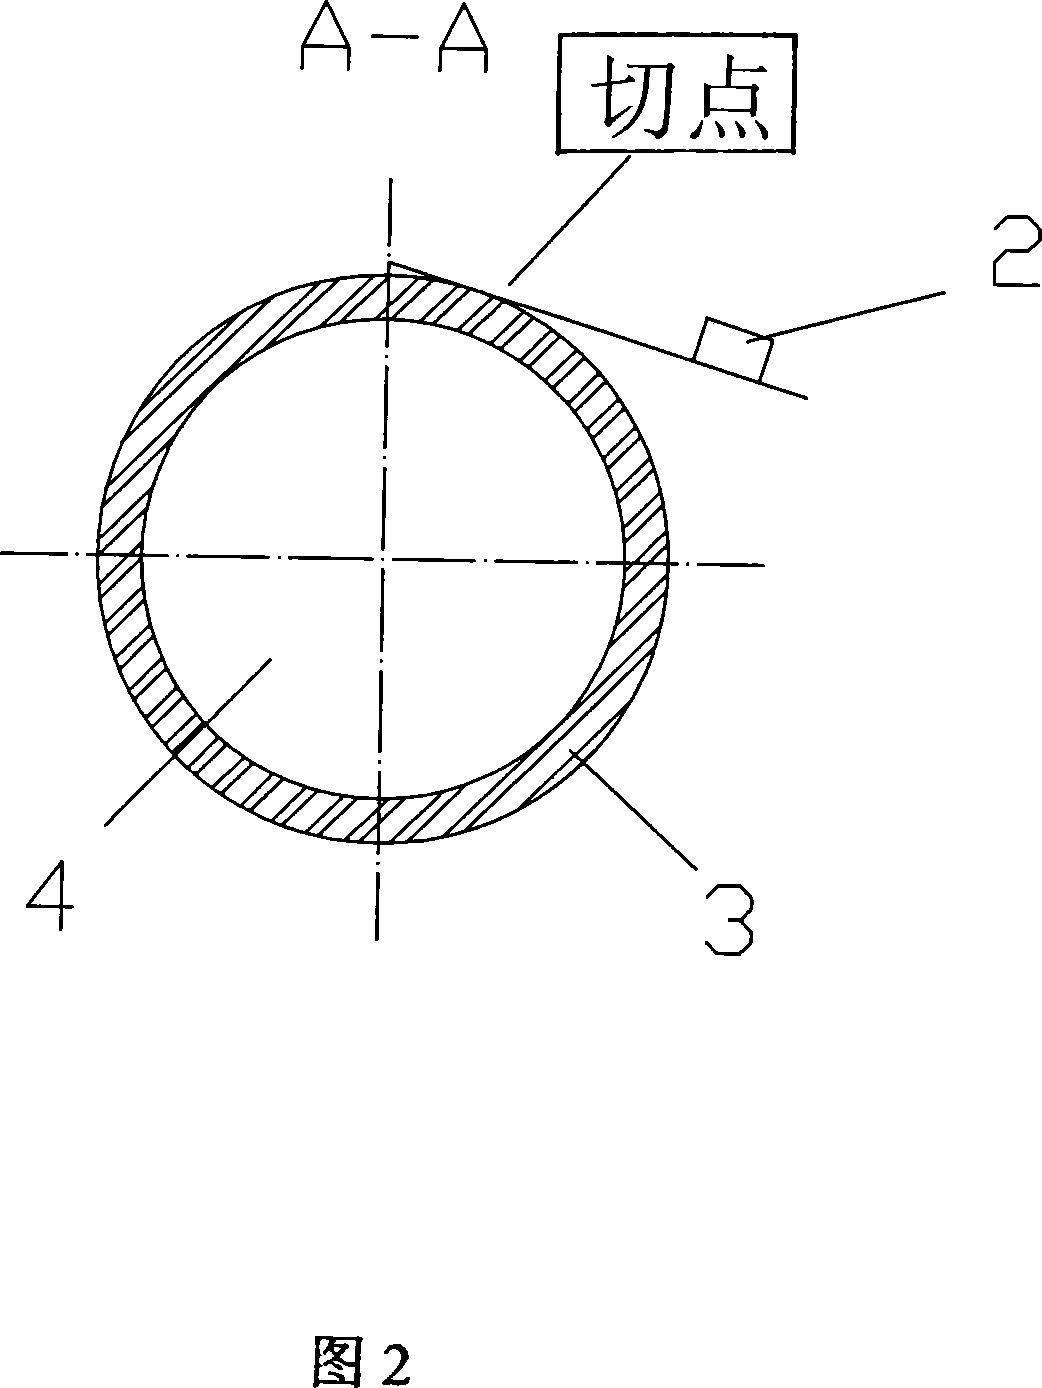 A winding packing and non woof belt method at rotating electromotor end